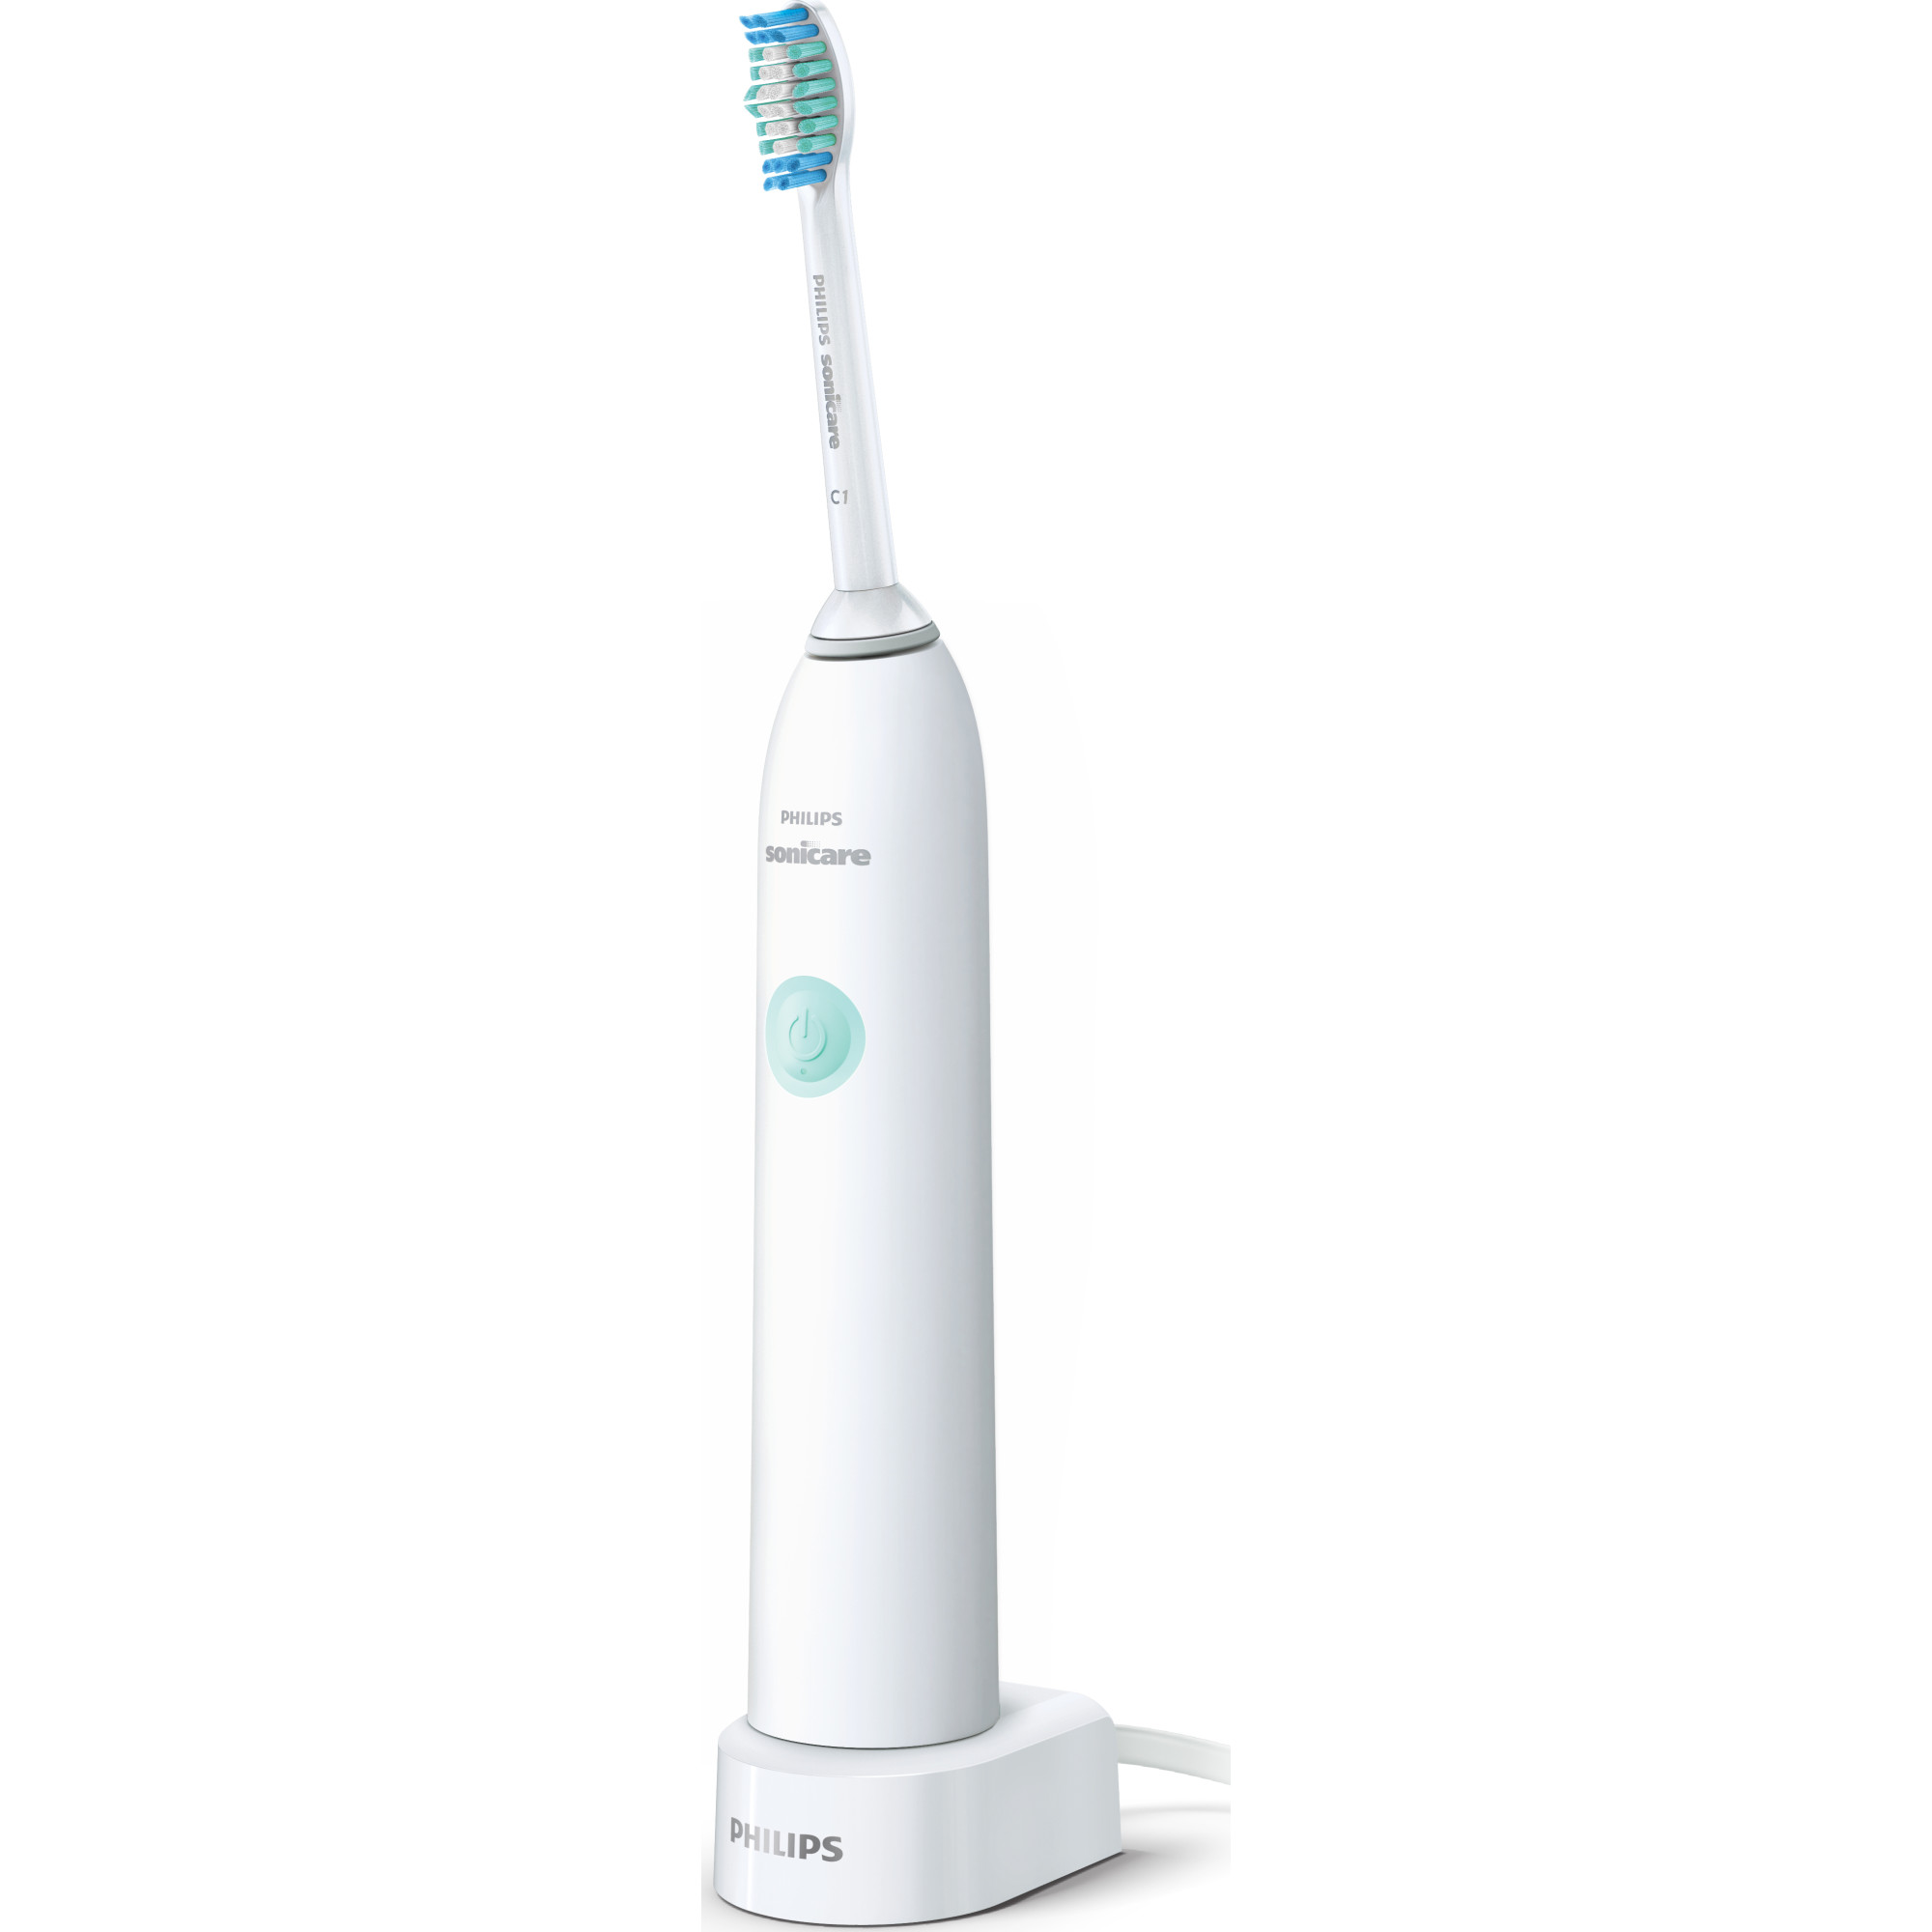 Philips Sonicare Dailyclean 1100 Rechargeable Electric Toothbrush, White HX3411/05 - image 2 of 10